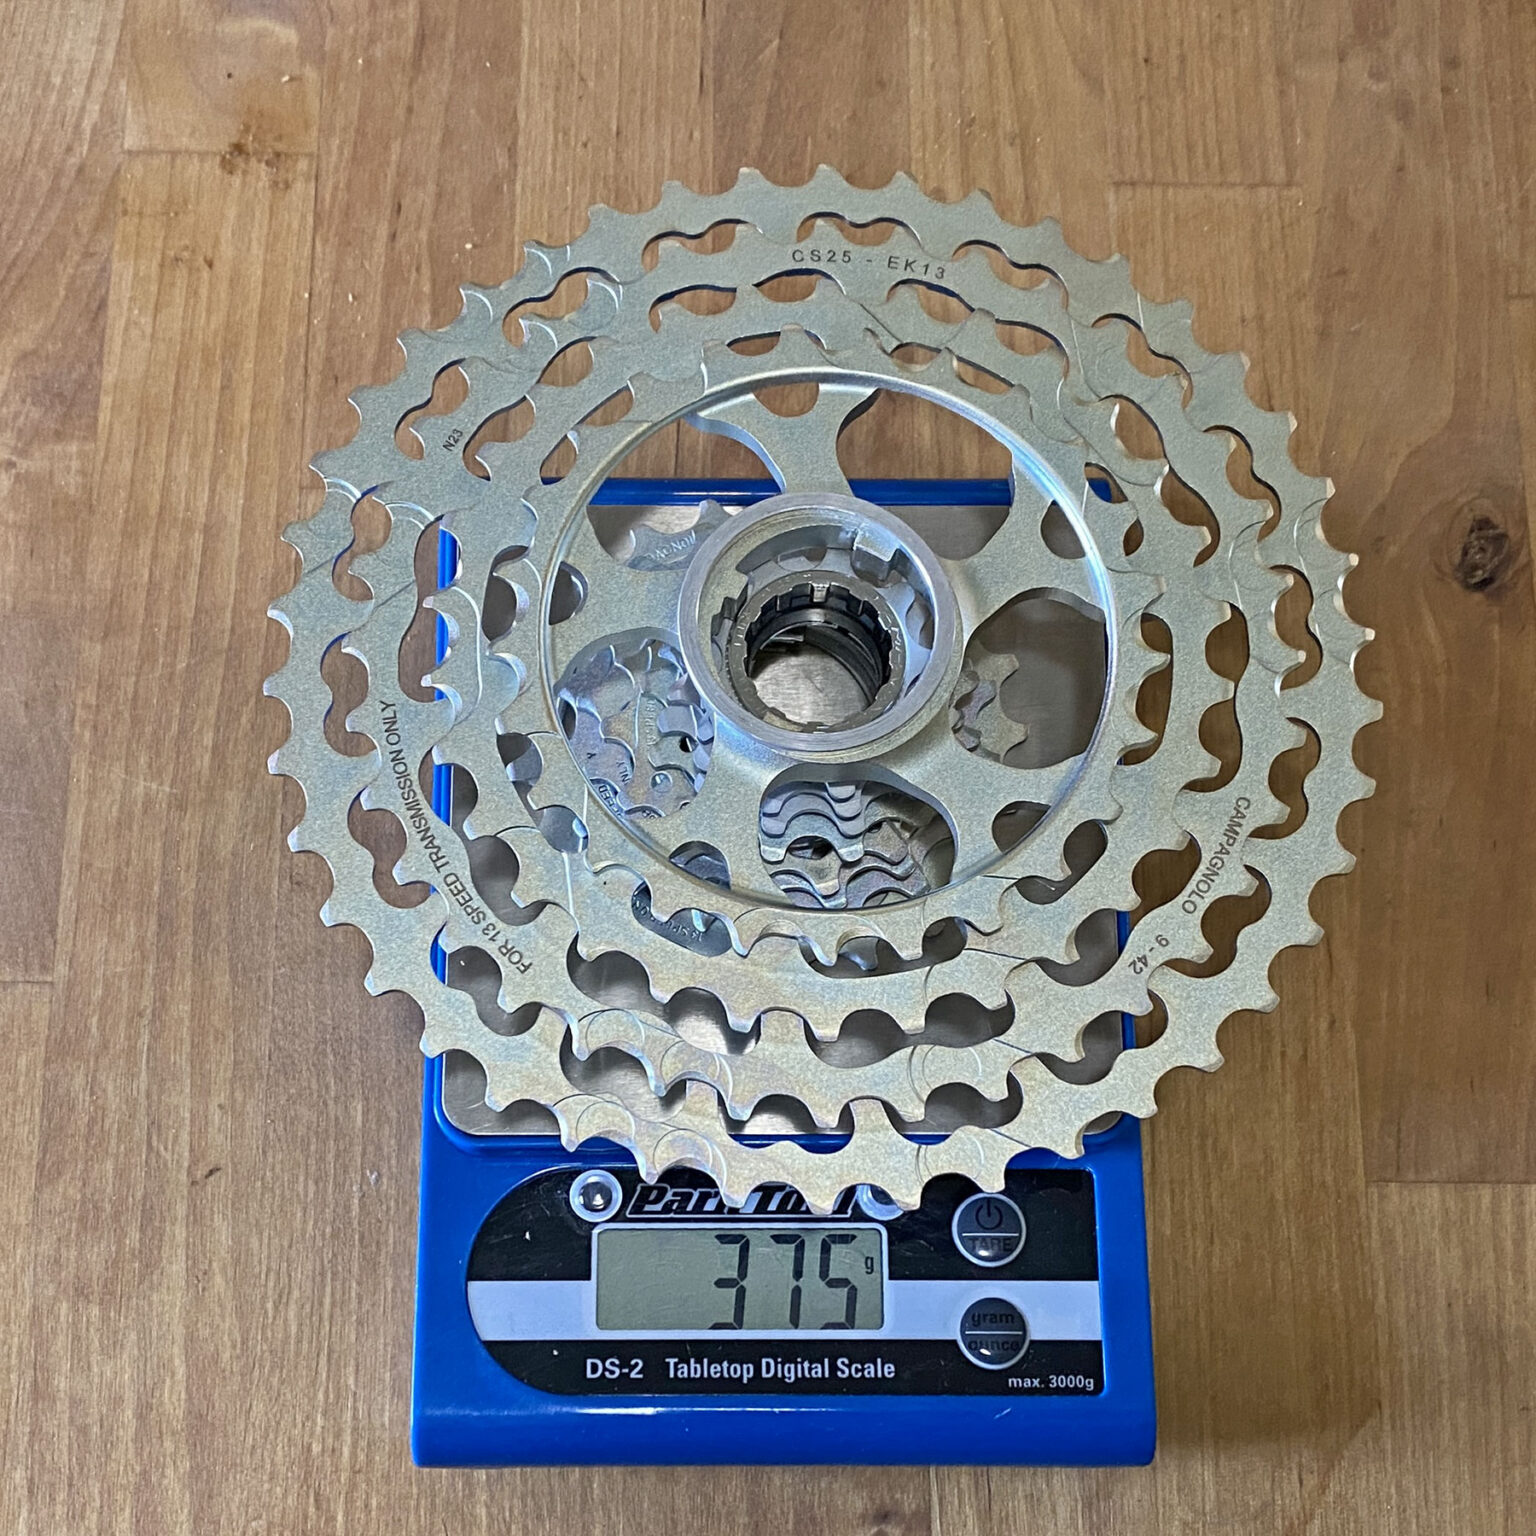 Campagnolo Ekar GT actual weights, affordable Campy gravel group, 9-42T cassette